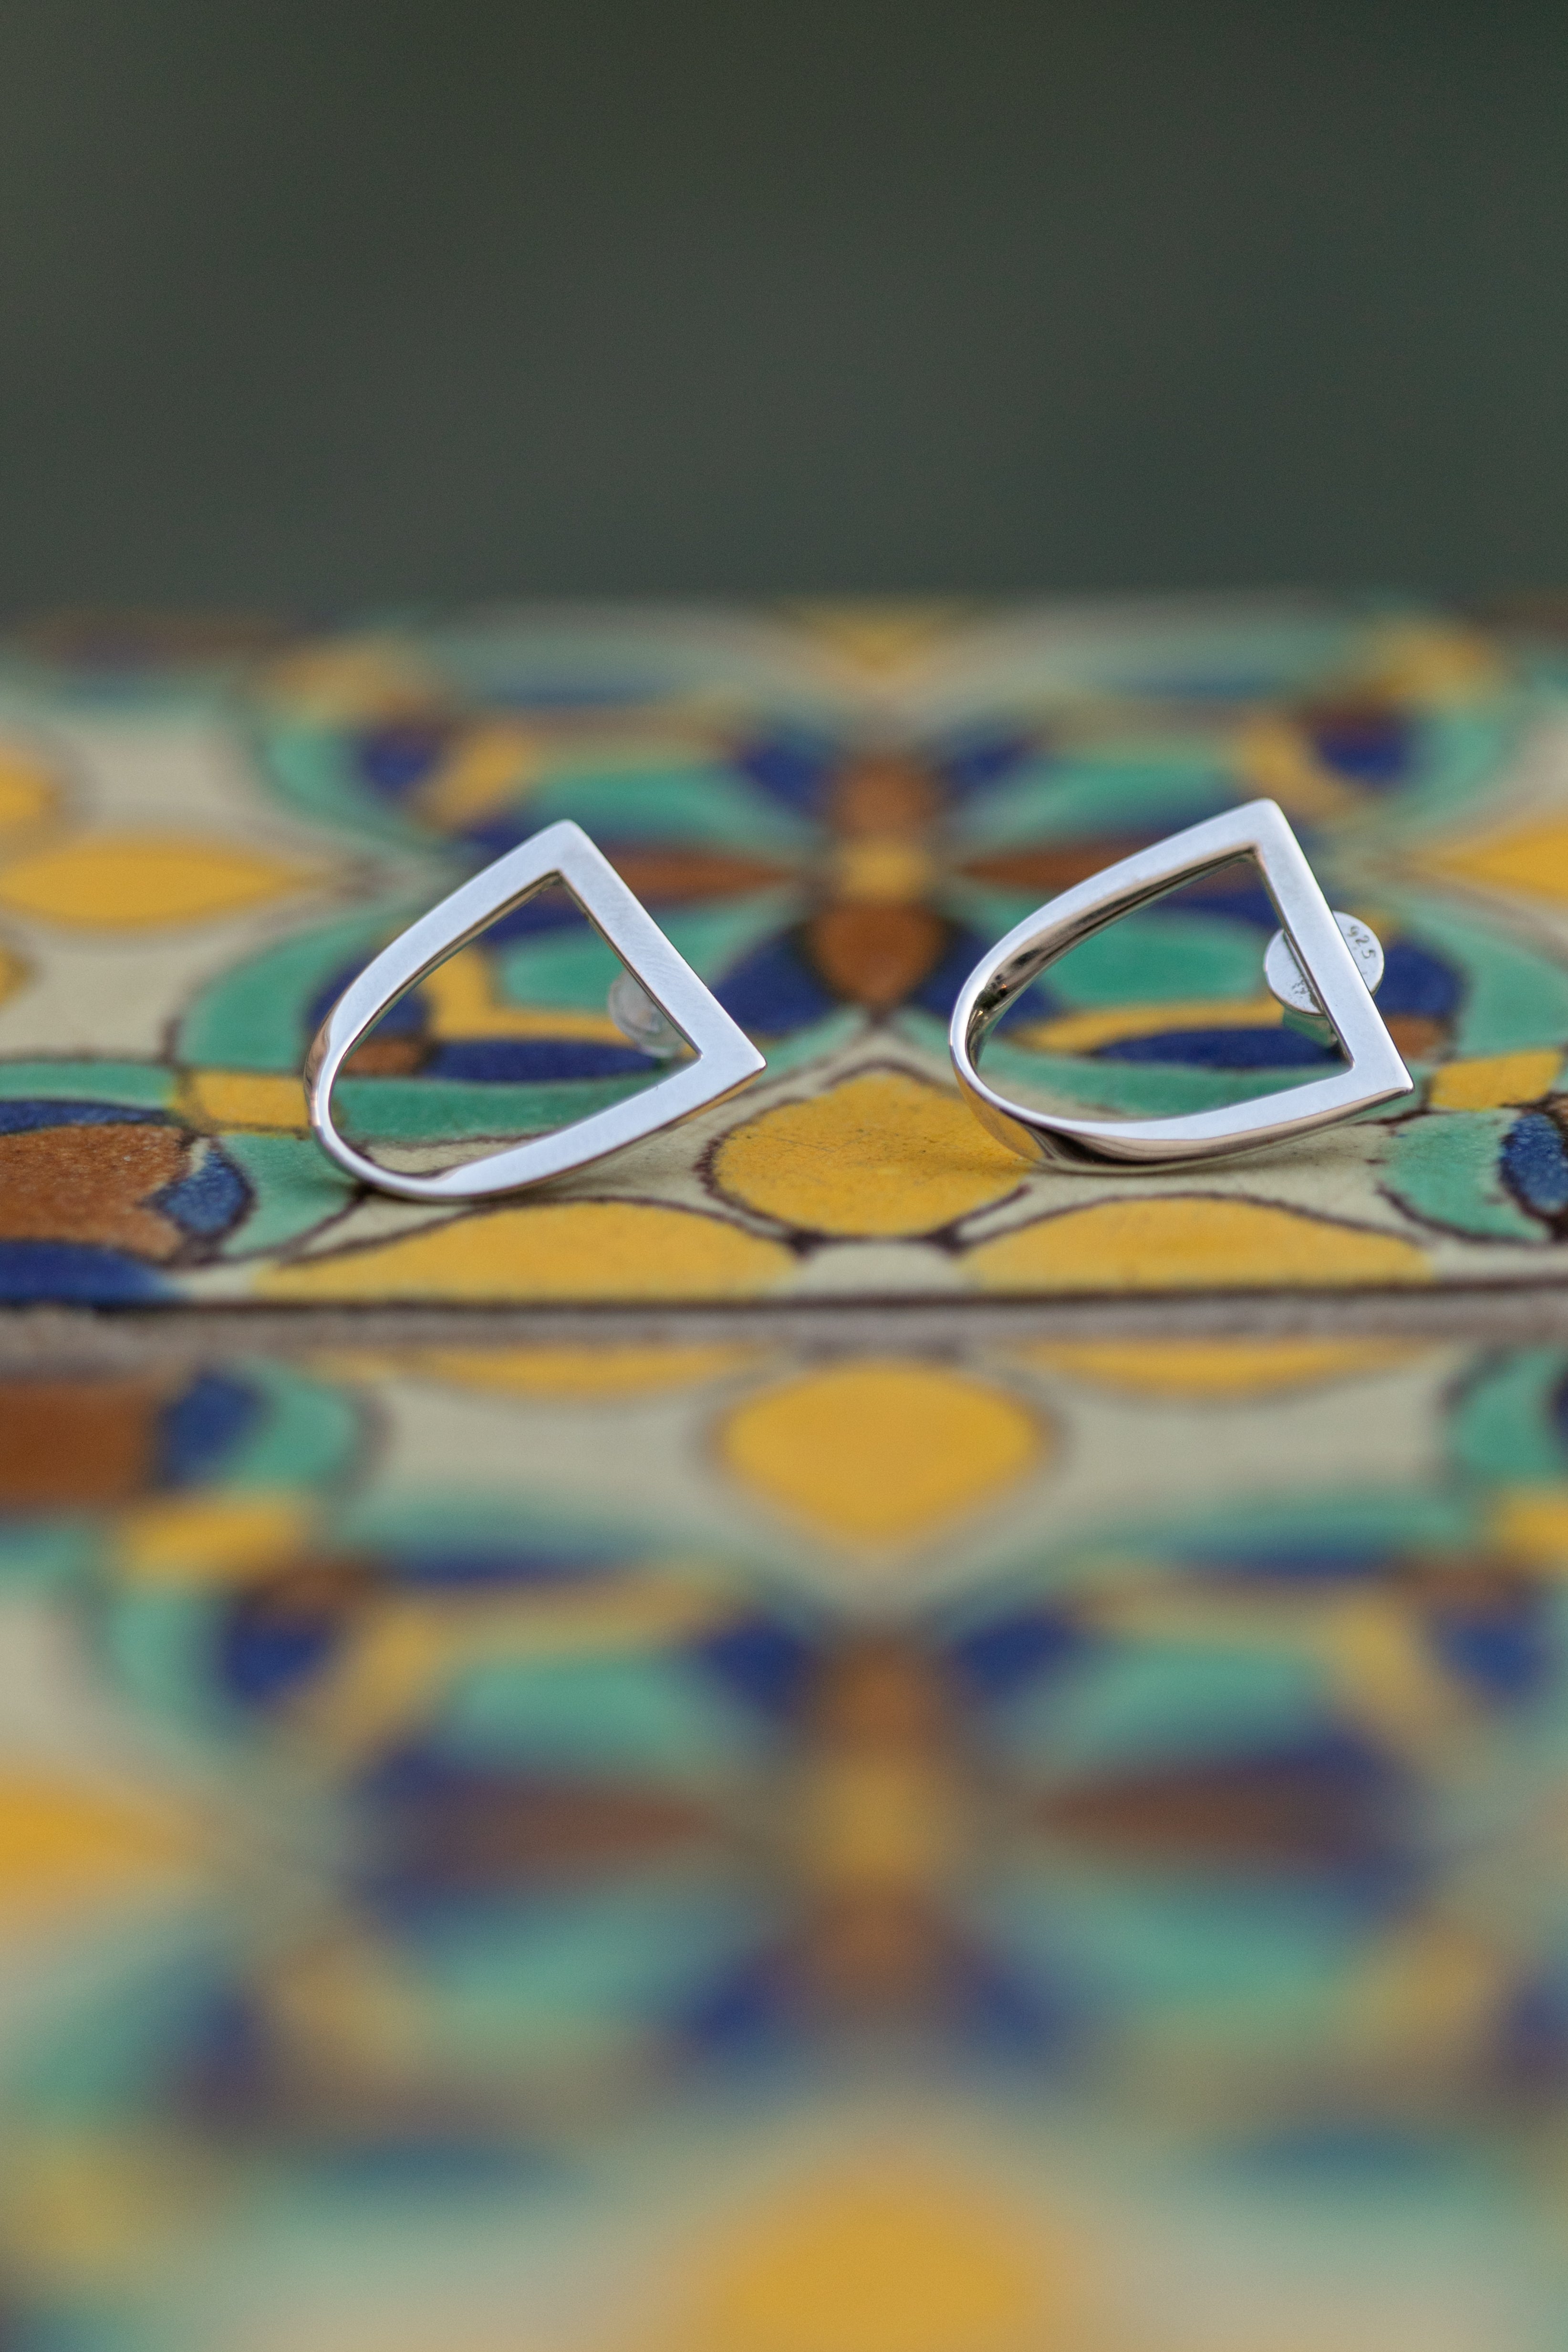 a pair of silver twist earrings sit atop a colorful Spanish style tile.